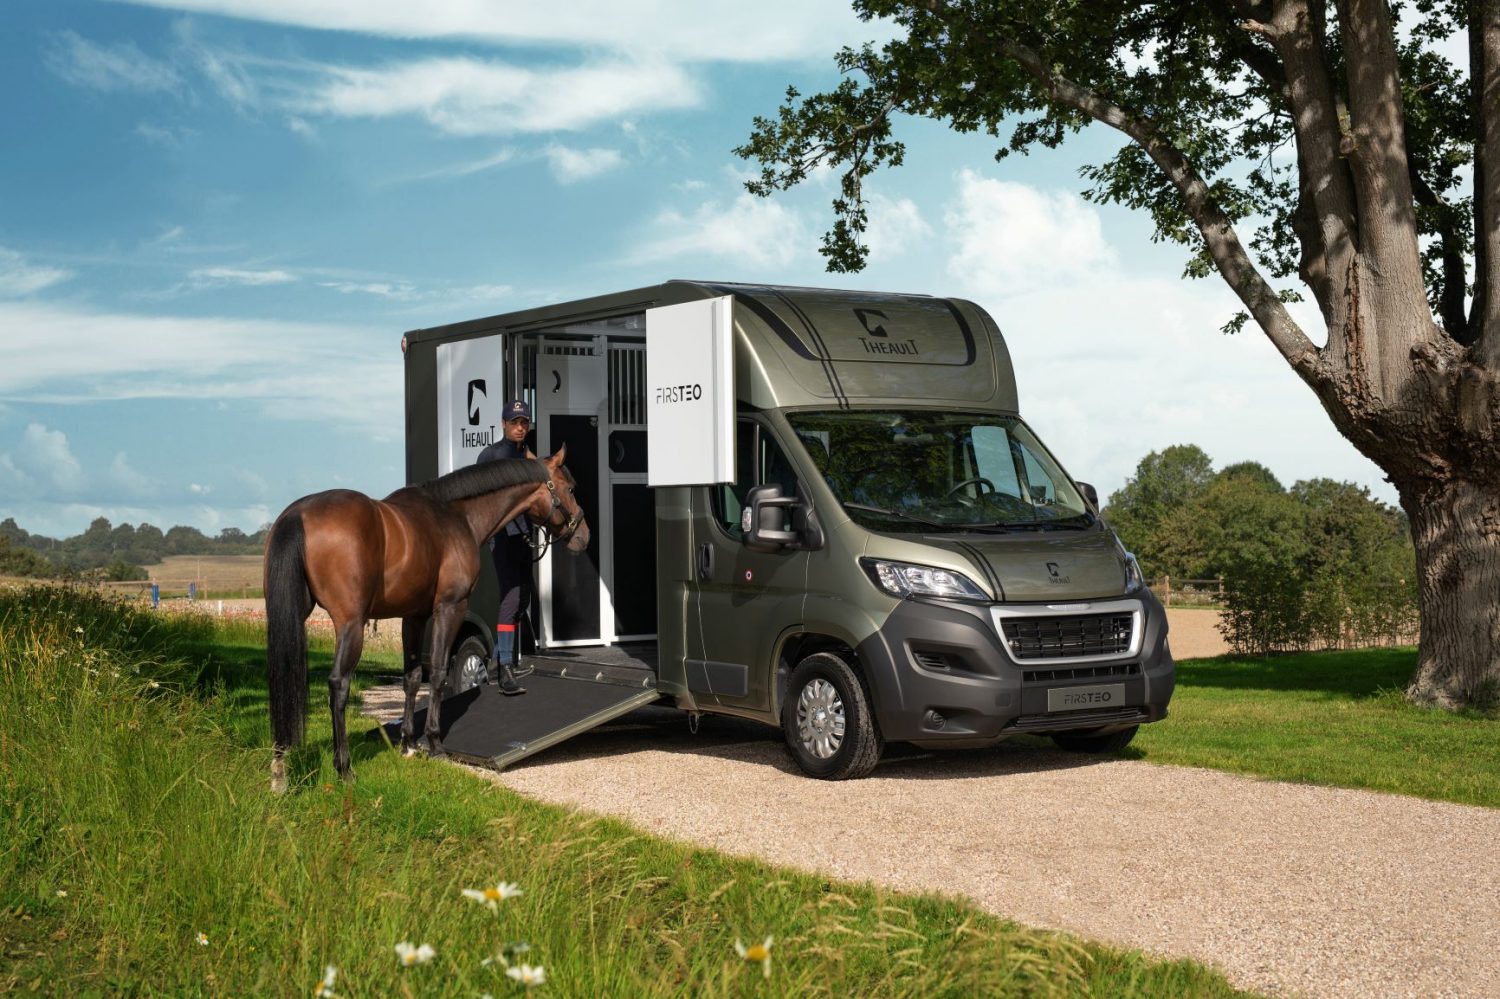 How To Find, Fund, and Care For Your Horsebox